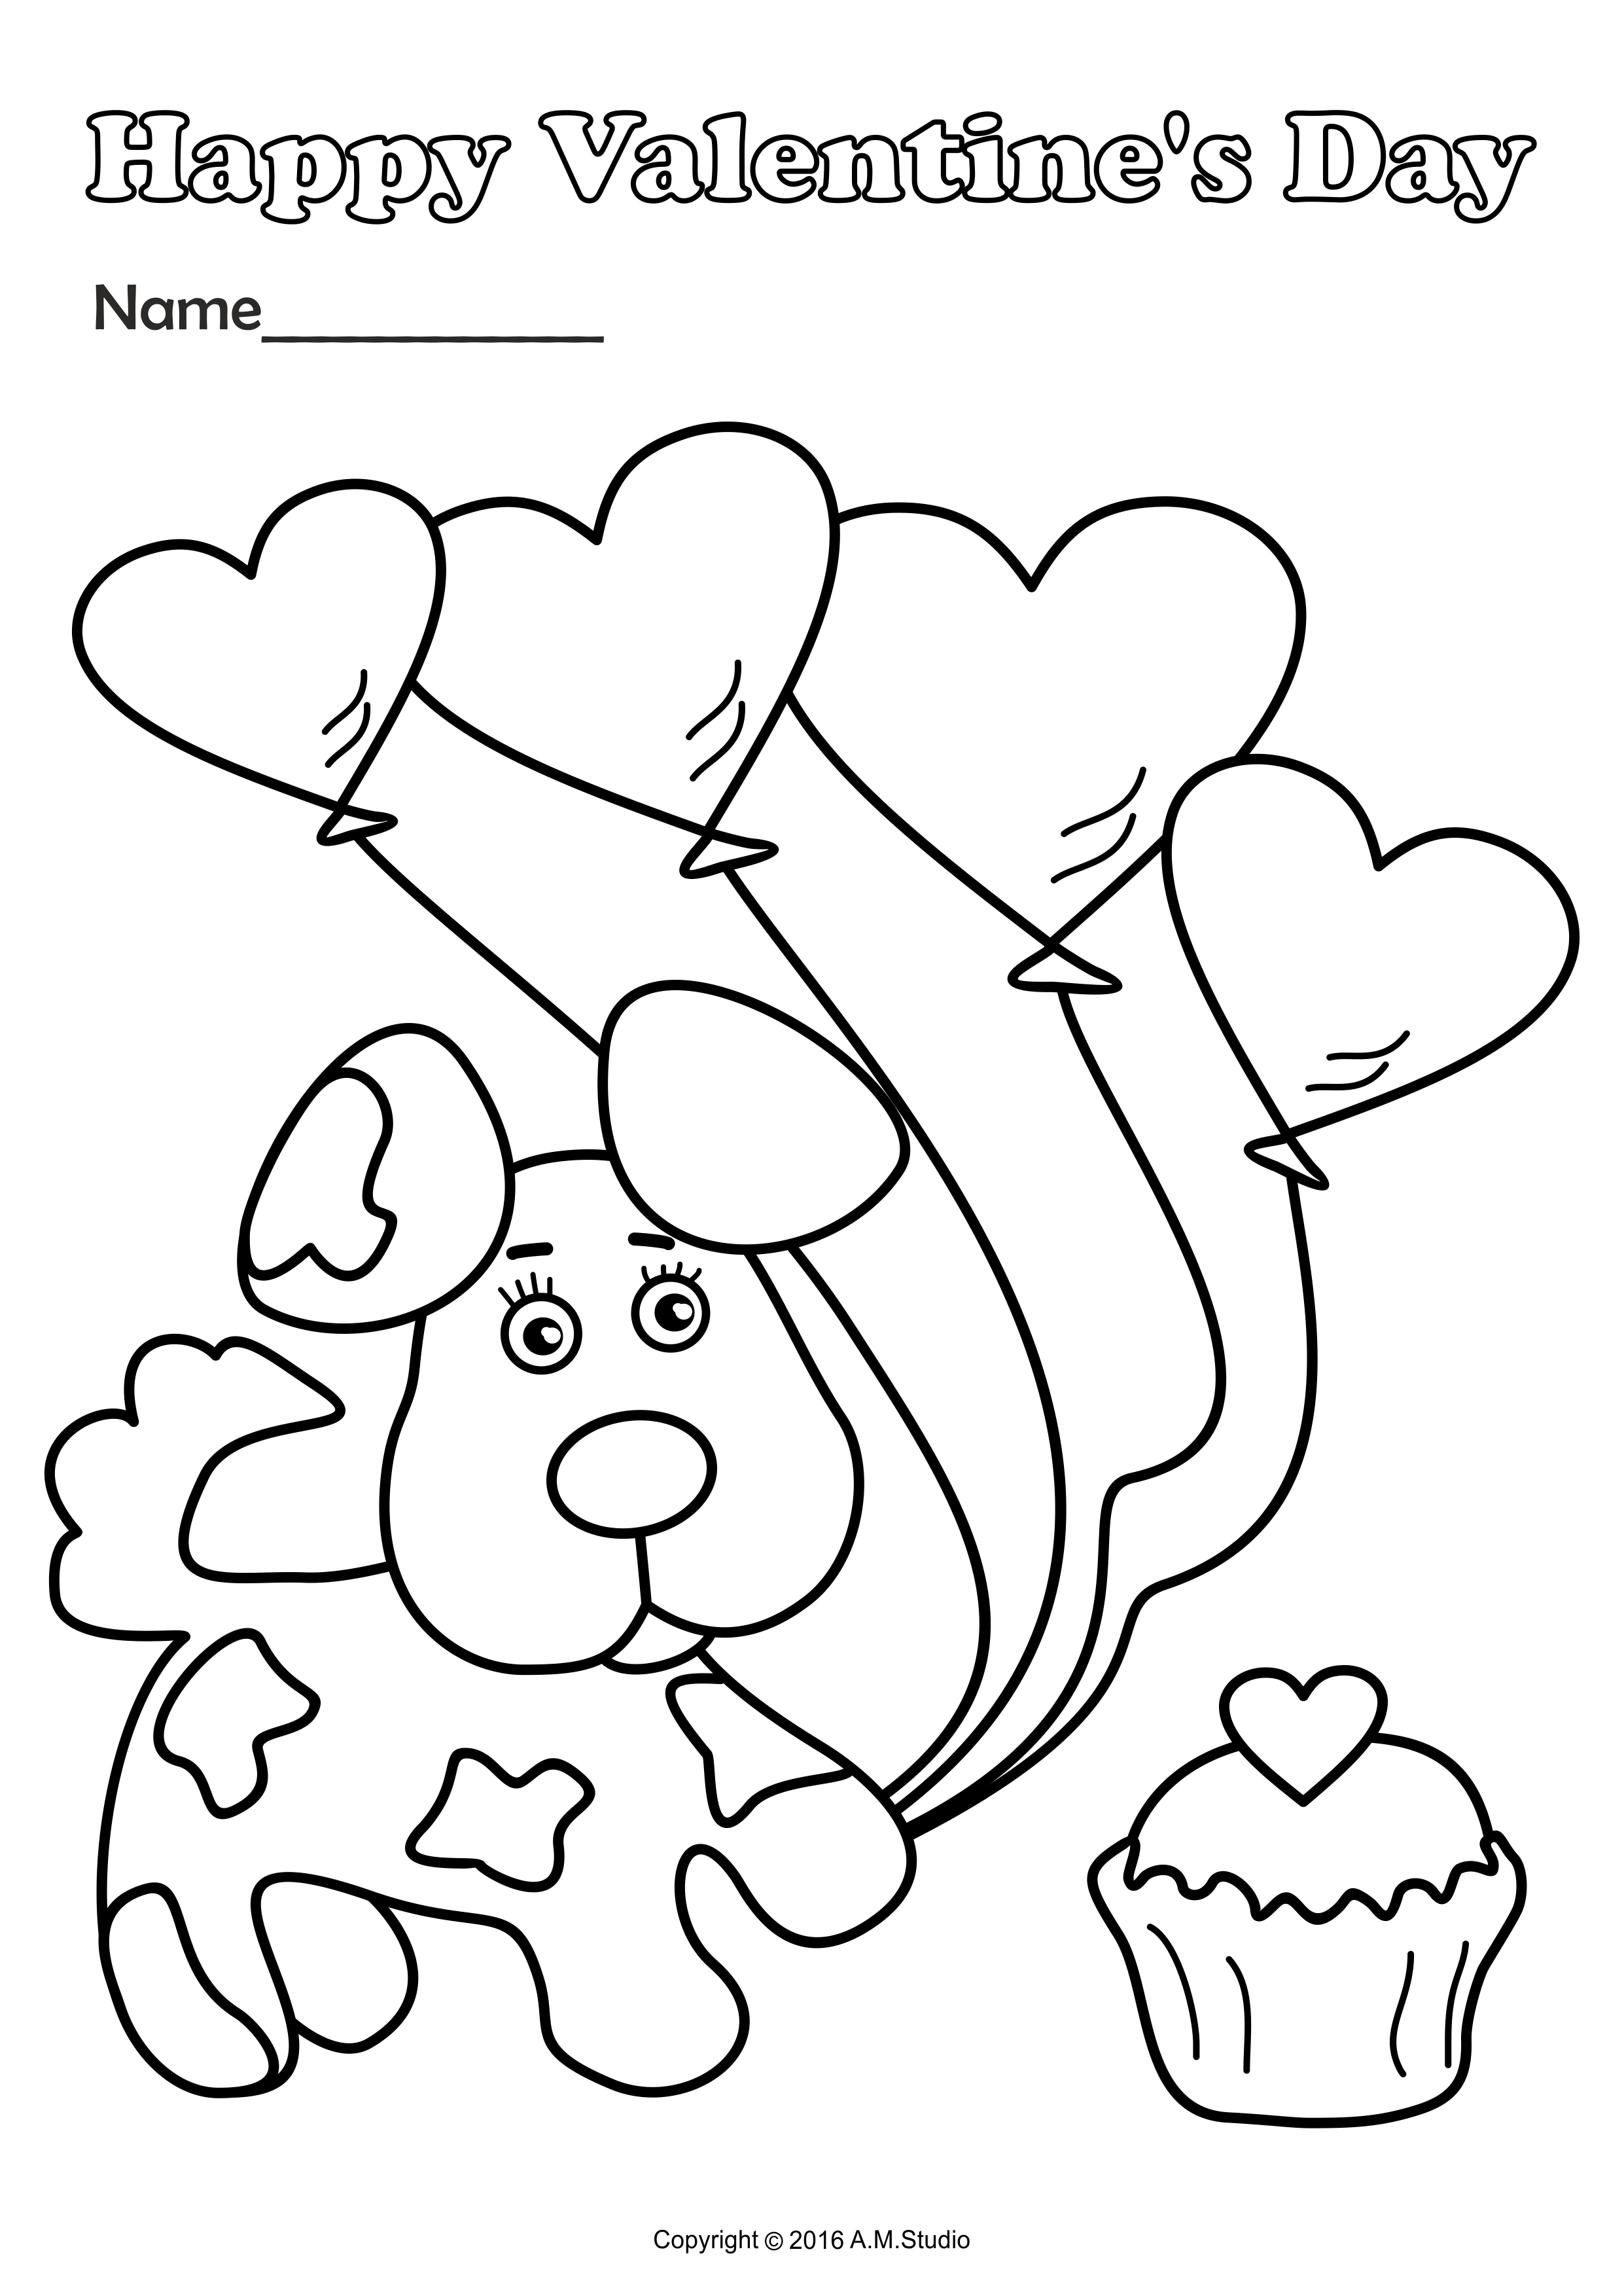 Valentine`s Day Printable Coloring Pages for Kids (img # 2)